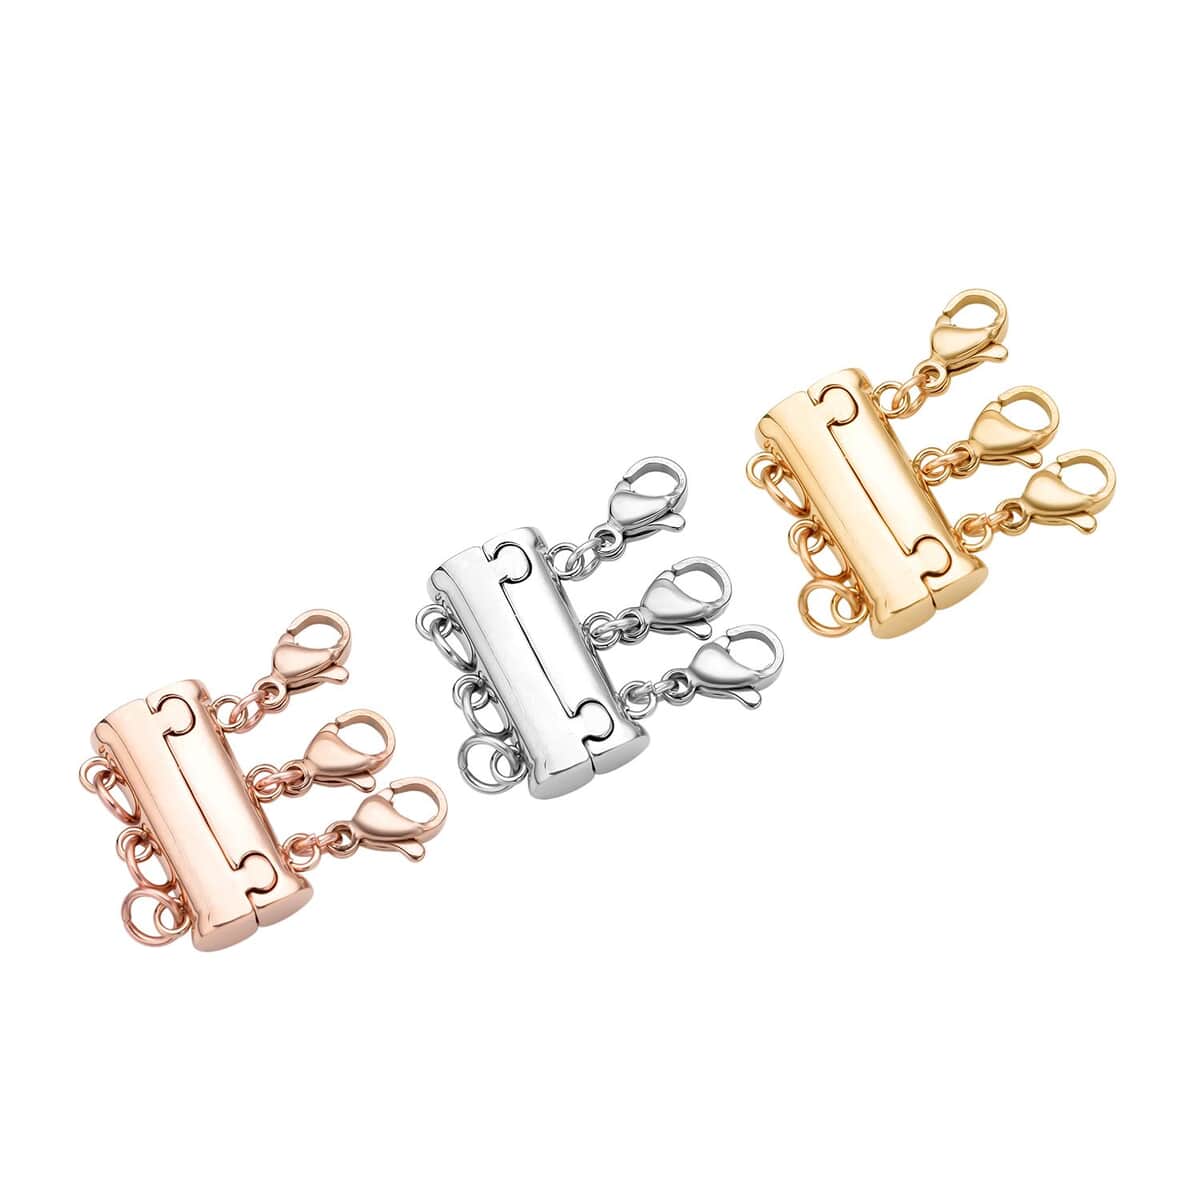 EVER TRUE Set of 3 Layering Locks with 3 Rows in ION Plated YG, RG and Stainless Steel 19.50 Grams image number 2